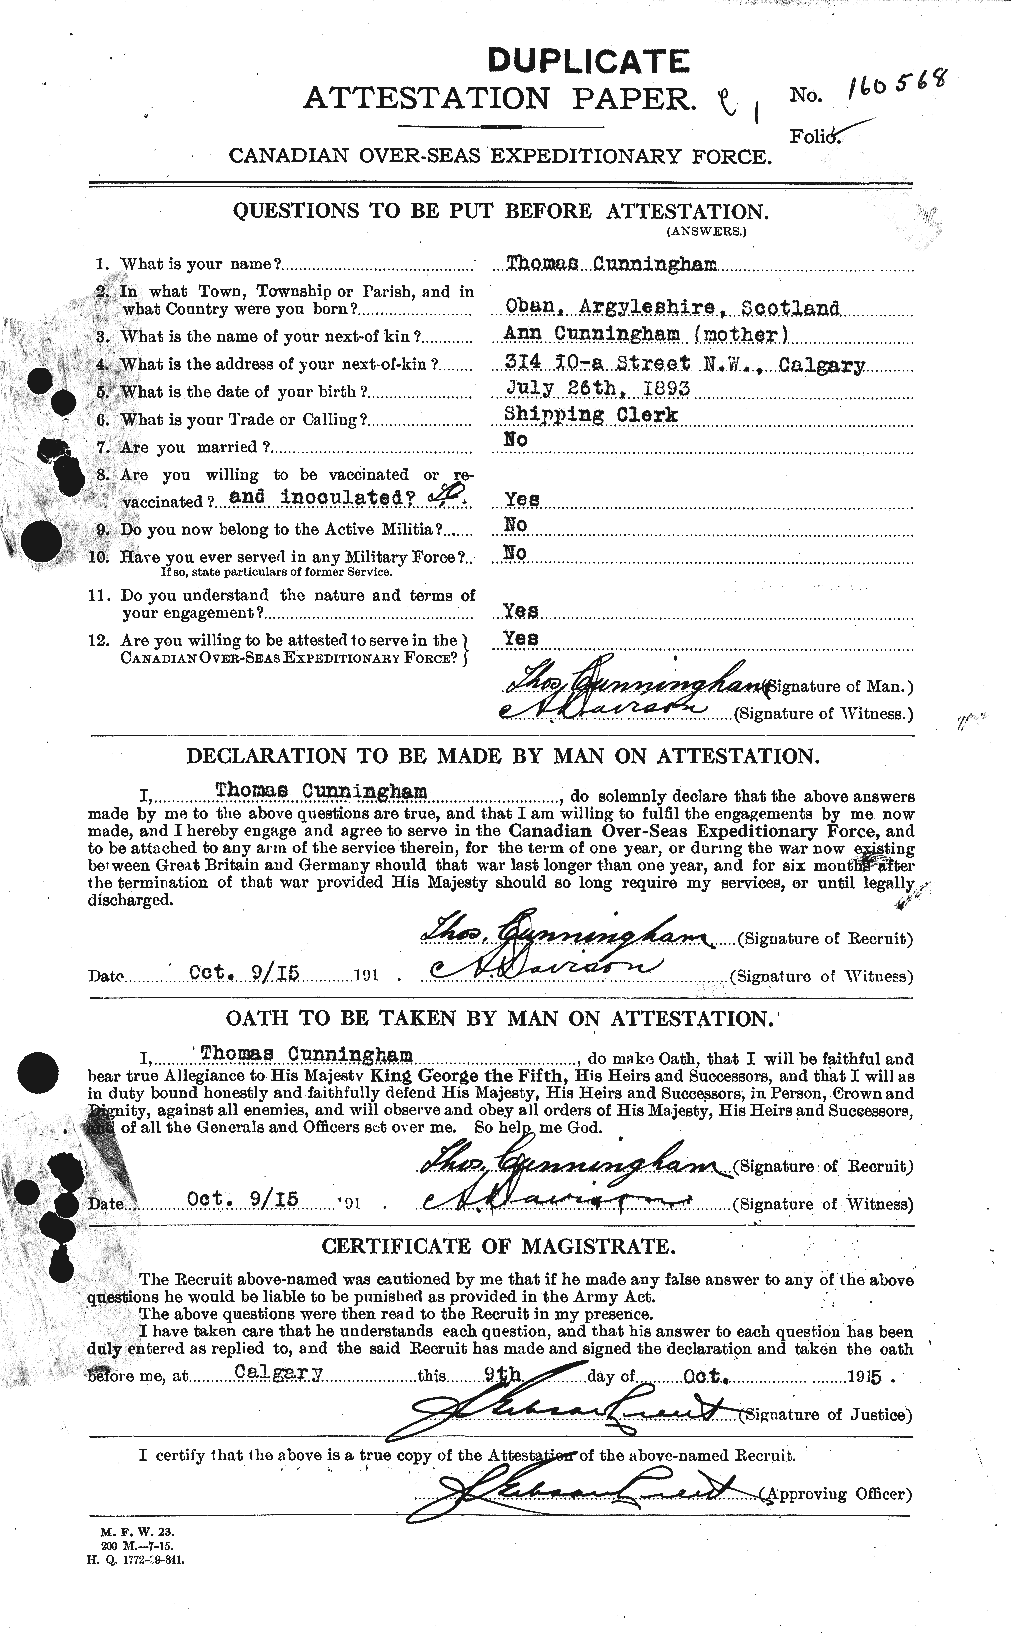 Personnel Records of the First World War - CEF 073593b